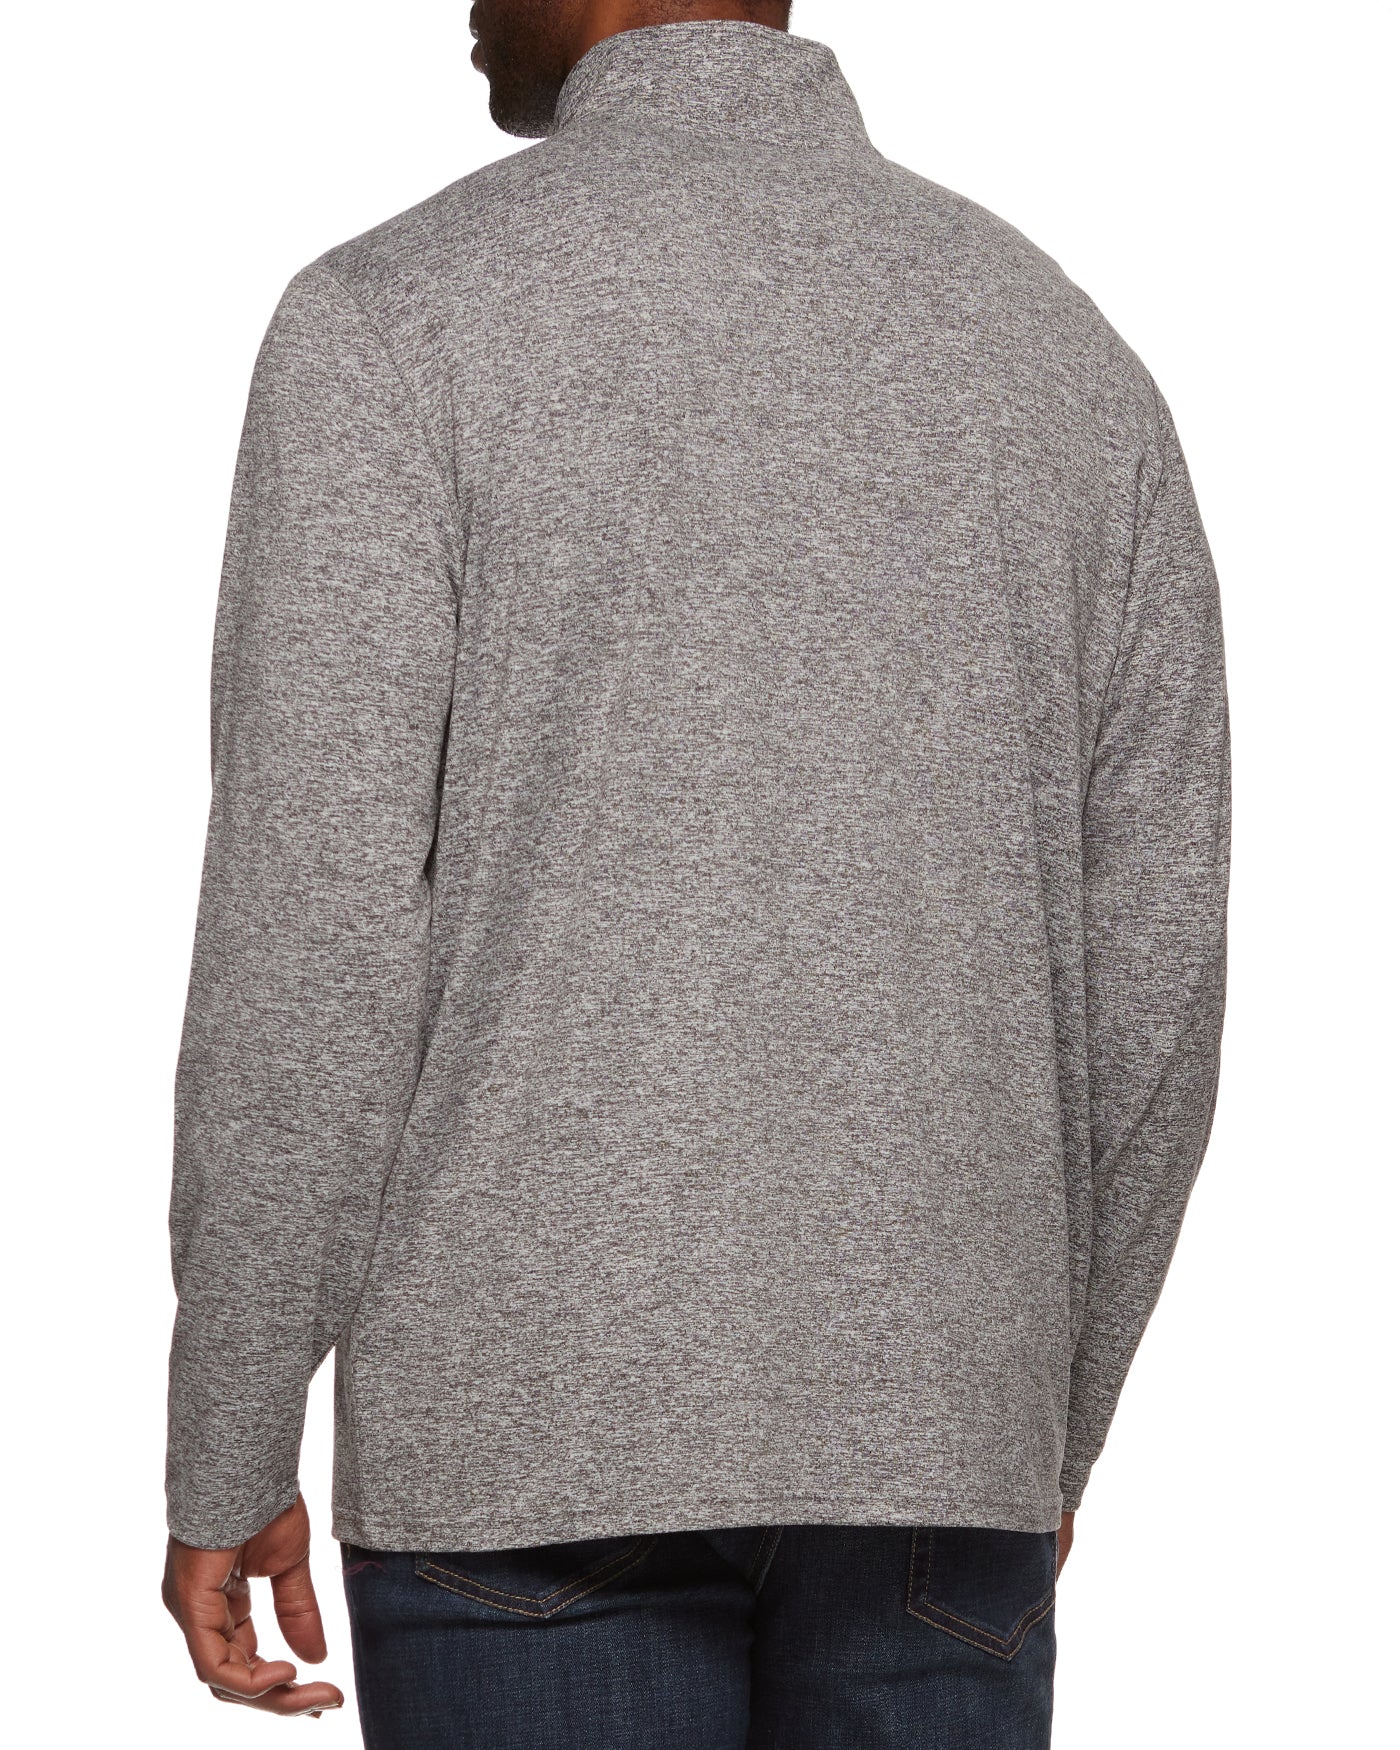 MADEFLEX ALL-DAY 1/4-ZIP PERFORMANCE PULLOVER